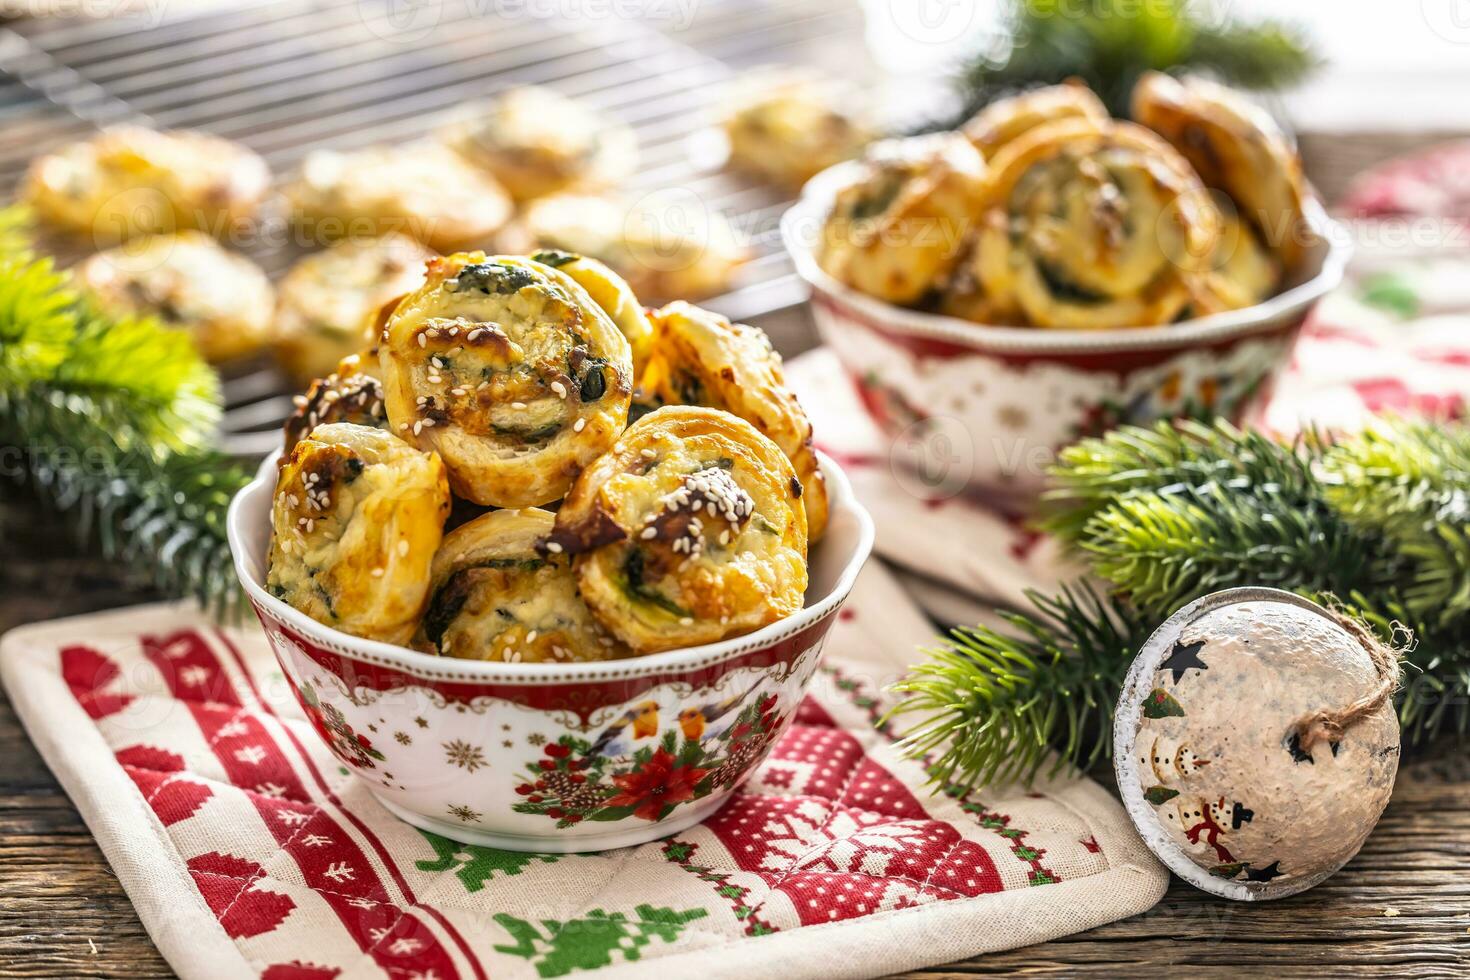 Christmas savory pastries, mini pizza cakes in a typical Christmas dish and festive decorations photo